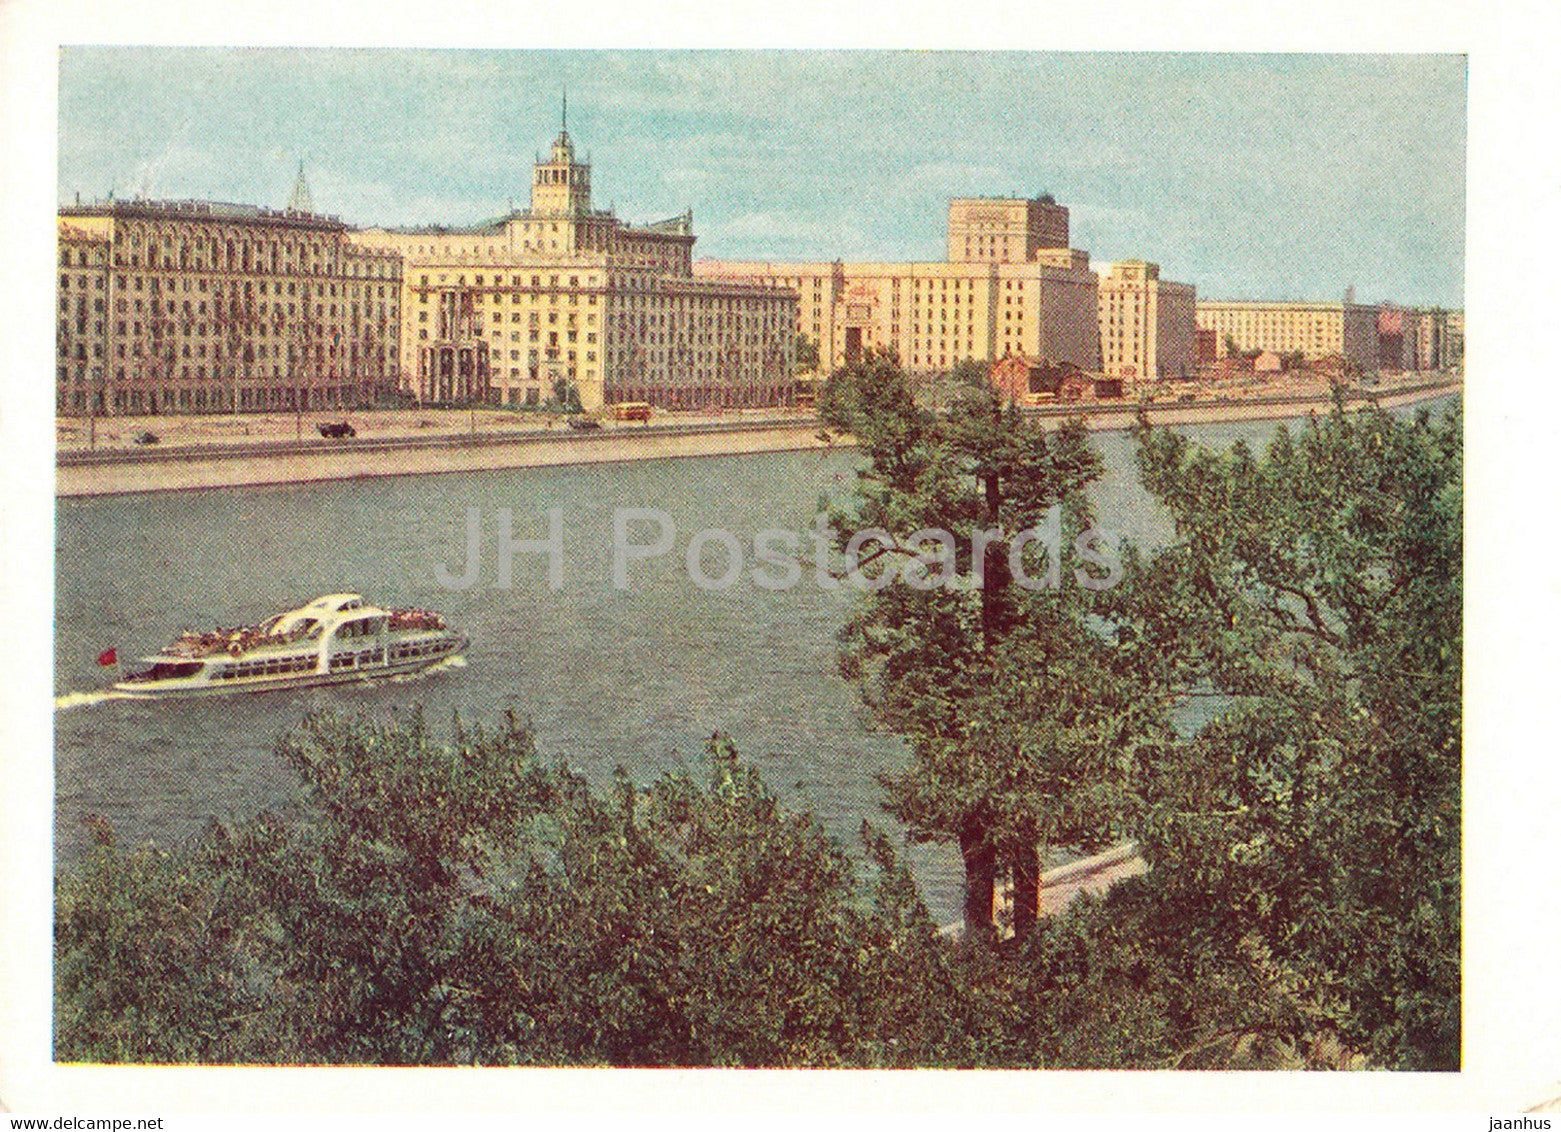 Moscow - Frunze Embankment from the Gorky Central Park - postal stationery - 1959 - Russia USSR - unused - JH Postcards